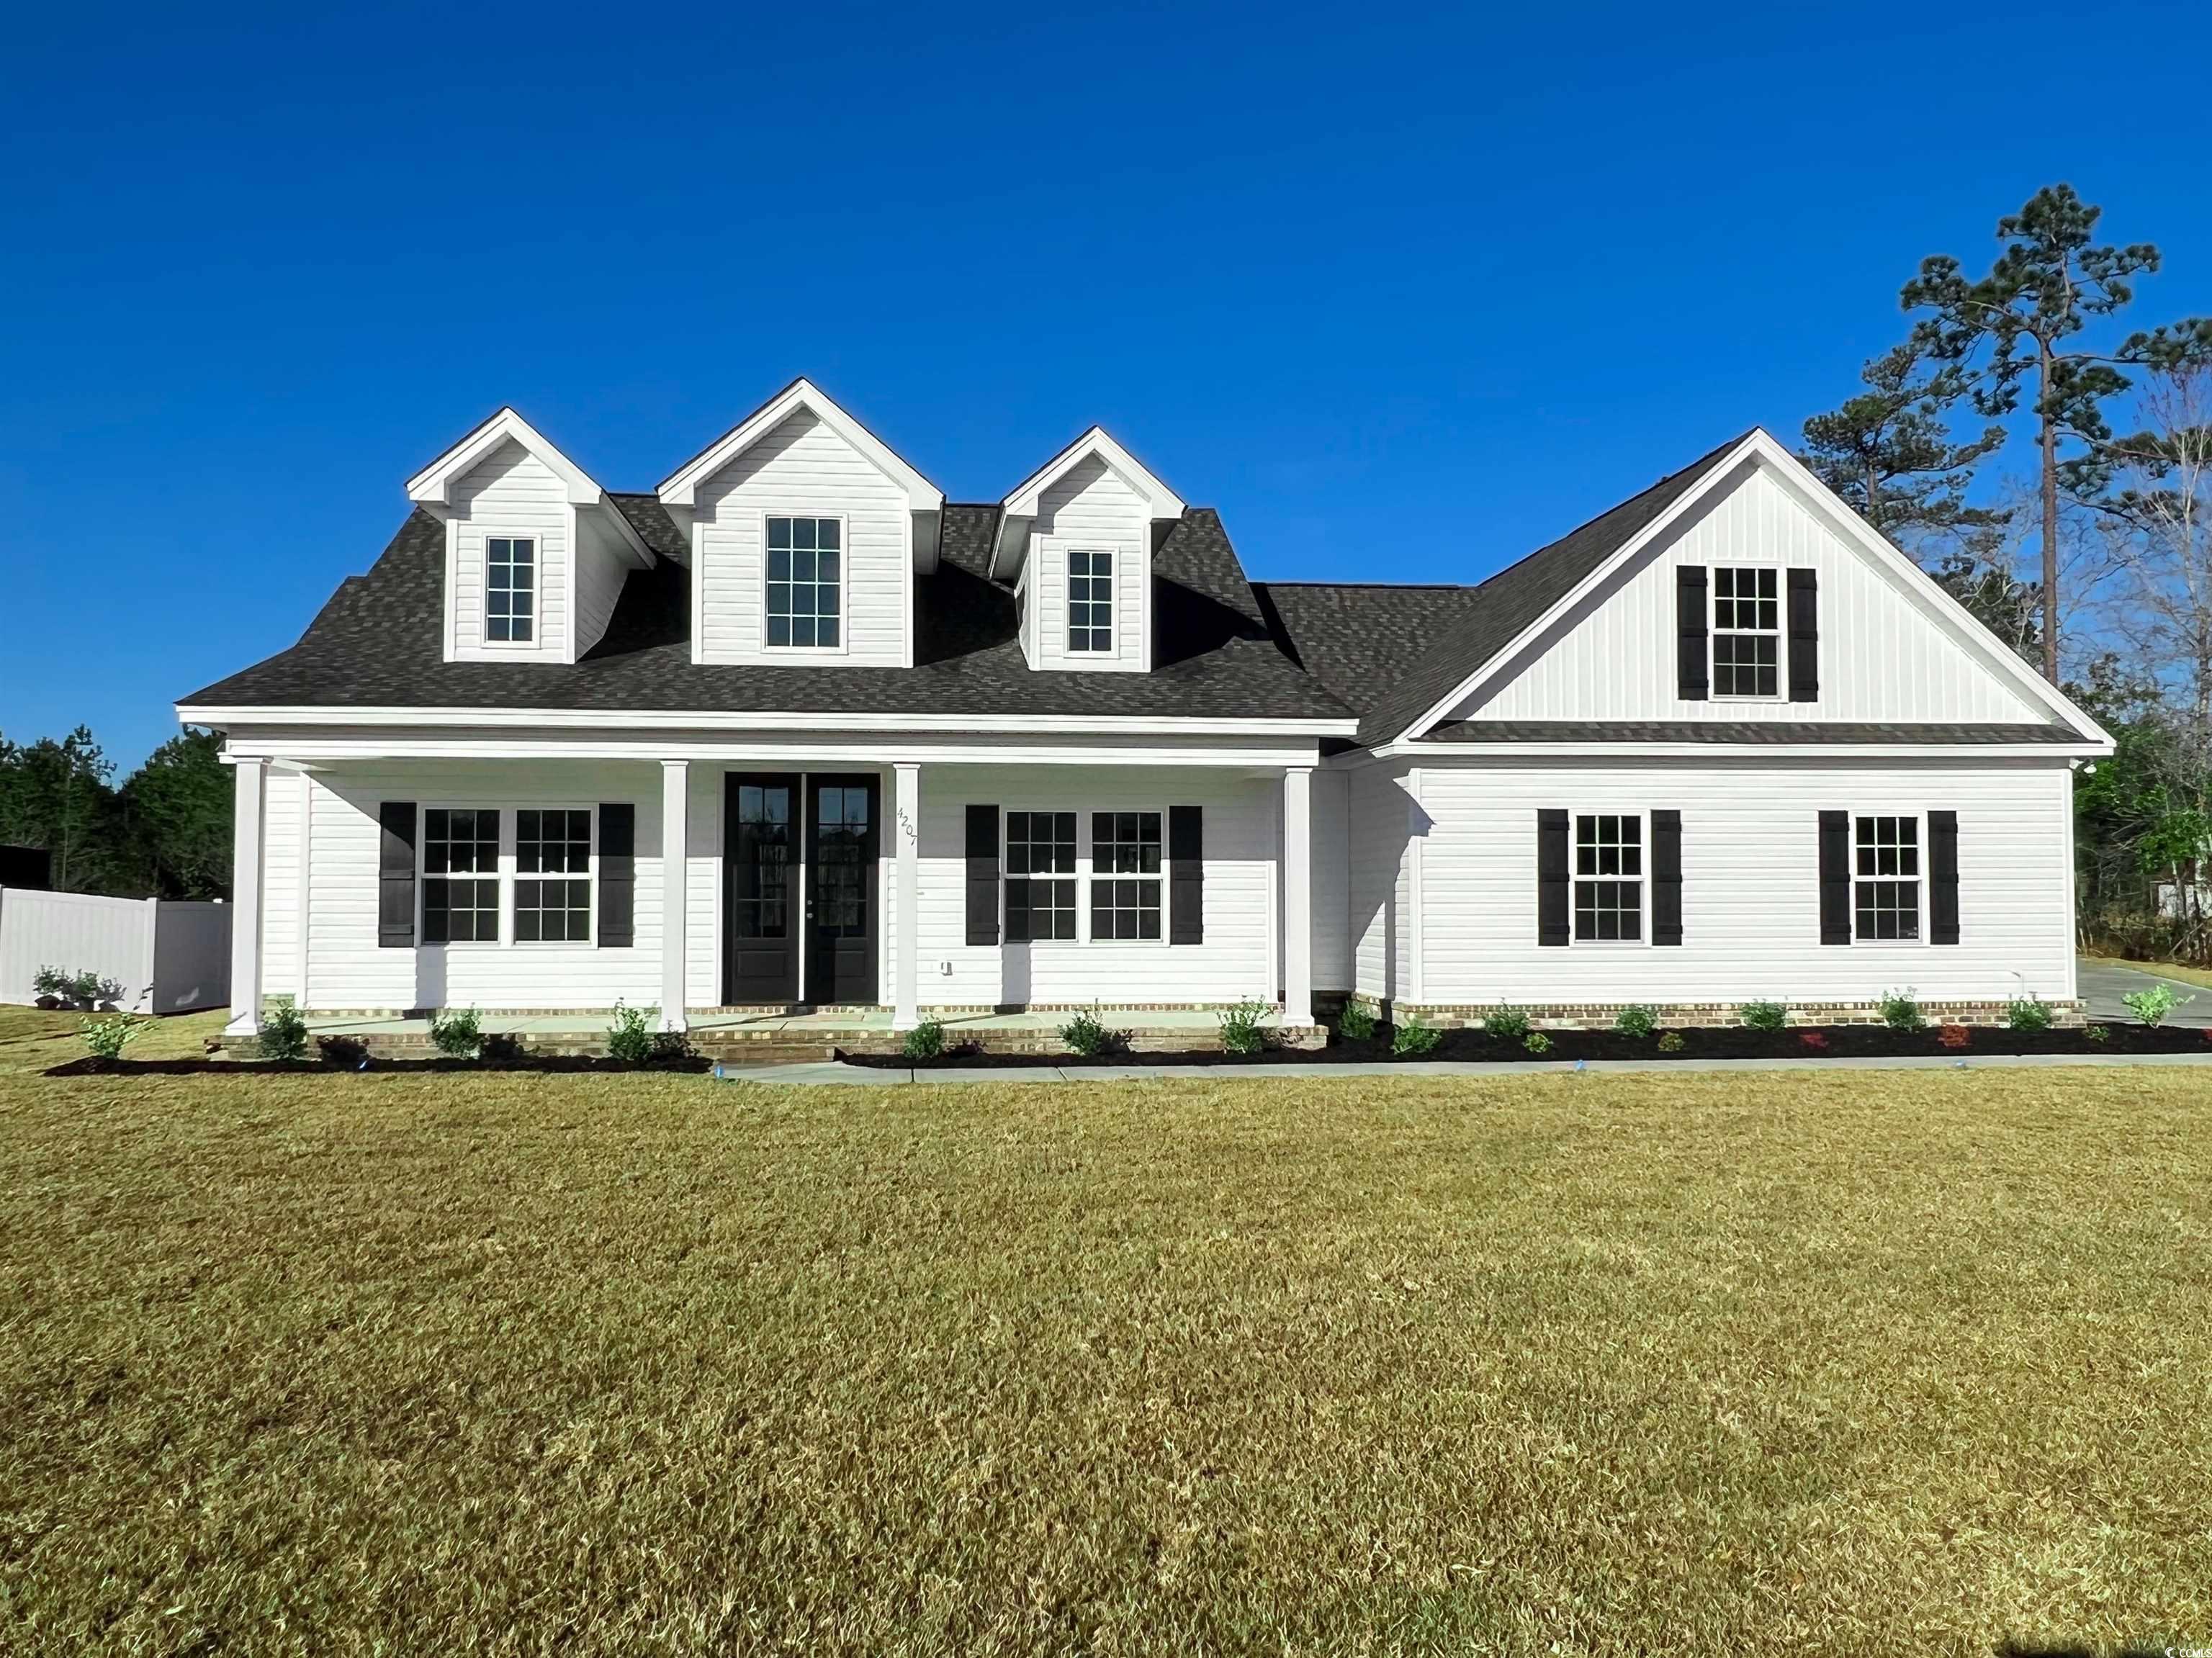 just minutes from beautiful conway, sc this beautiful ranch on .68 of an acre (no hoa) is built by the local builder voted best of the grand strand and best of the beach for the third consecutive year.  this beautiful santee plan is an open floor plan with 3 bedrooms, 2 full baths, a study/library and lvp flooring throughout the main living areas, baths and primary bedroom.  it features stainless appliances, staggered height white painted shaker style kitchen cabinets, beautiful granite kitchen countertops, subway tile backsplash and plenty of recessed lighting.  there is a covered rear porch and additional patio great for outdoor grilling off of the living room.  the primary bedroom features a beautiful tray ceiling that includes a ceiling fan.  the primary bath features double bowl sinks, a huge walk-in closet, large, oversized walk-in shower and plenty of storage.  two additional bedrooms and a full bath are on the other side of the house located on their own private hallway.  the two-car side entry garage is oversized and is completely trimmed and painted with wi-fi-enabled garage door openers and drop down stairs leading to floored attic storage.  this home has so much more to offer!  make an appointment to see this beautiful home and make it your very own! please note:  photos are of a completed home of the same/similar floor plan, for informational purposes only, since the listed home is currently in the building process.  the actual home may have different features, upgrades and colors that the photos shown is the listing.